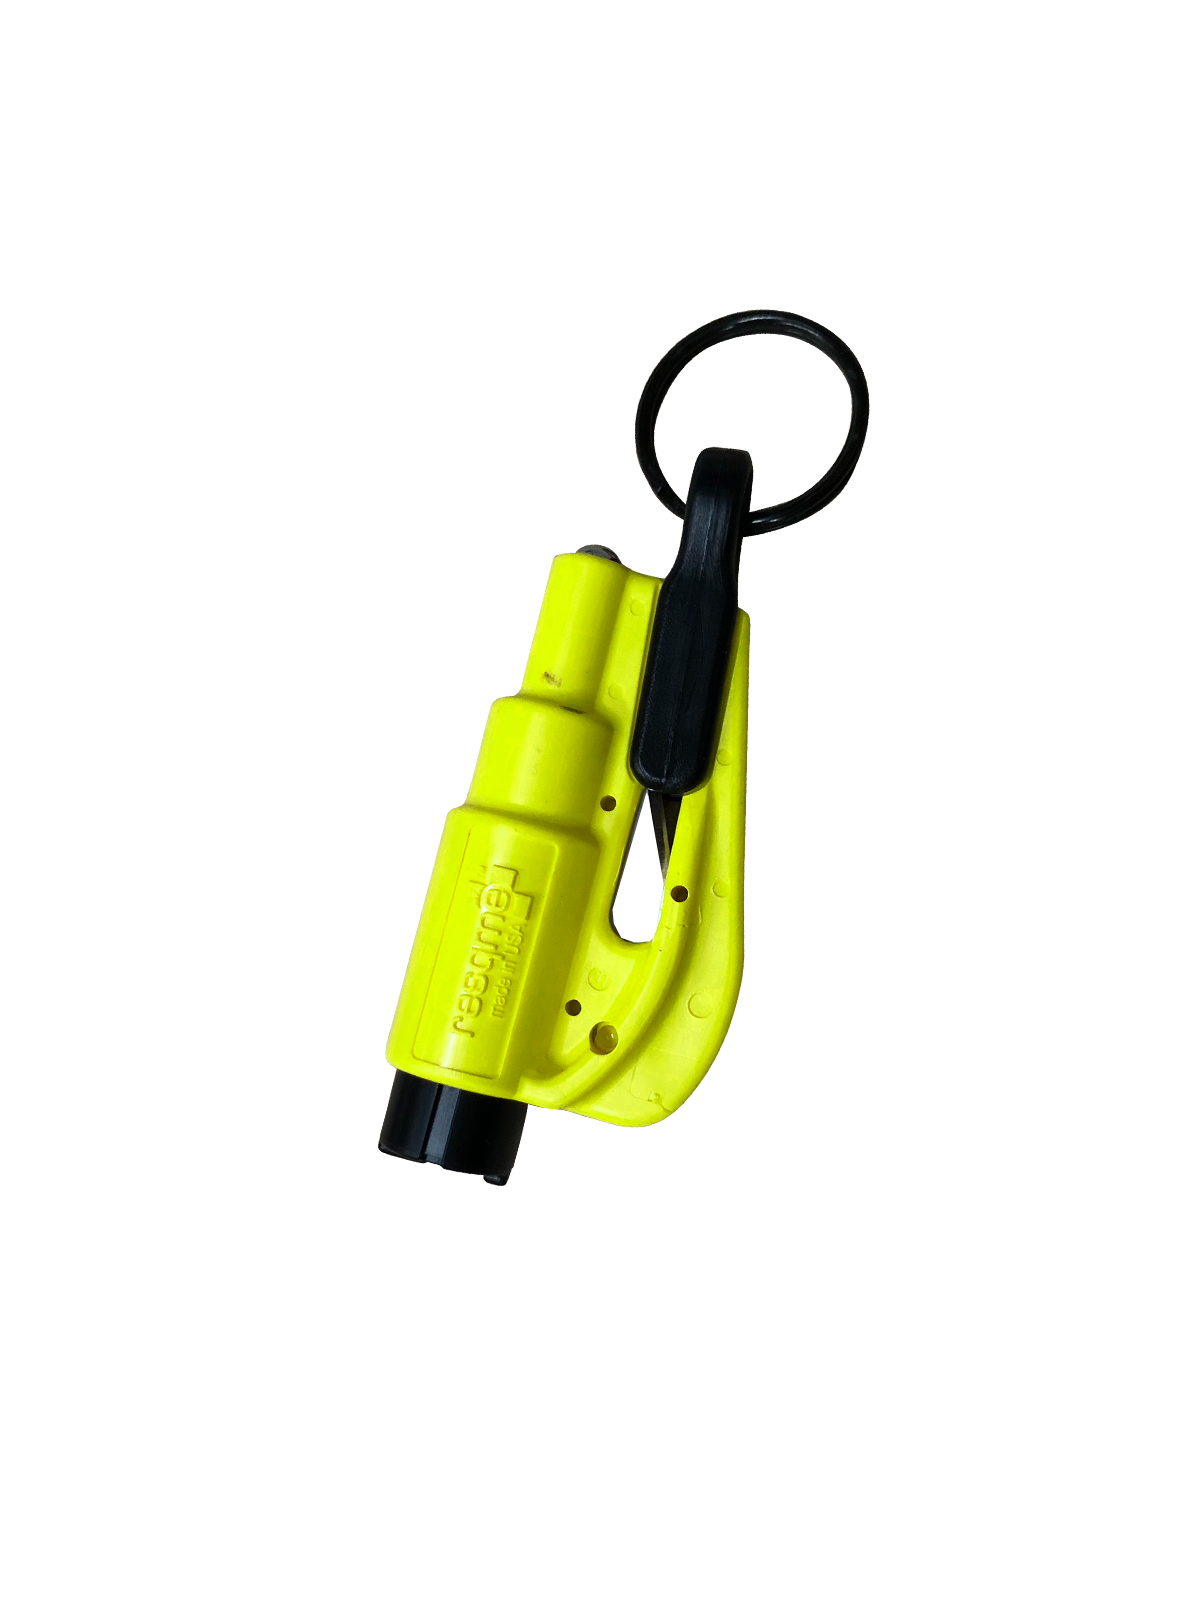 ResQme rescue tool - Police Supplies